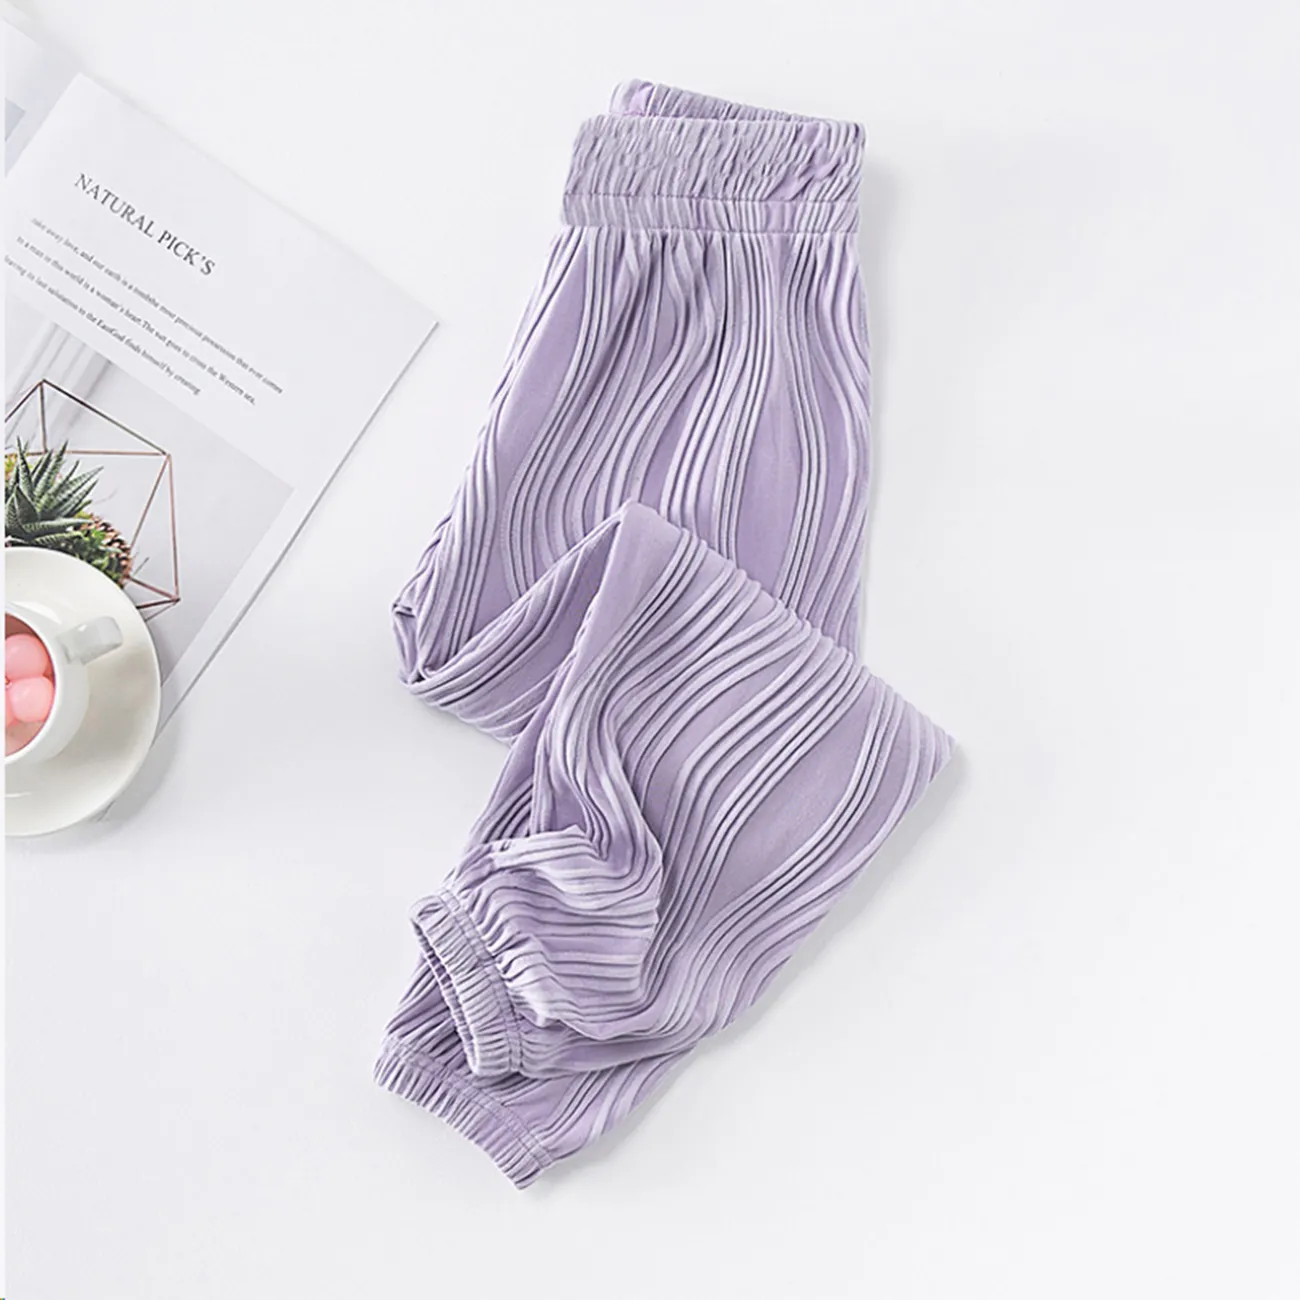 Toddler Girl's Cool Wave Air Conditioning Pants Purple big image 1